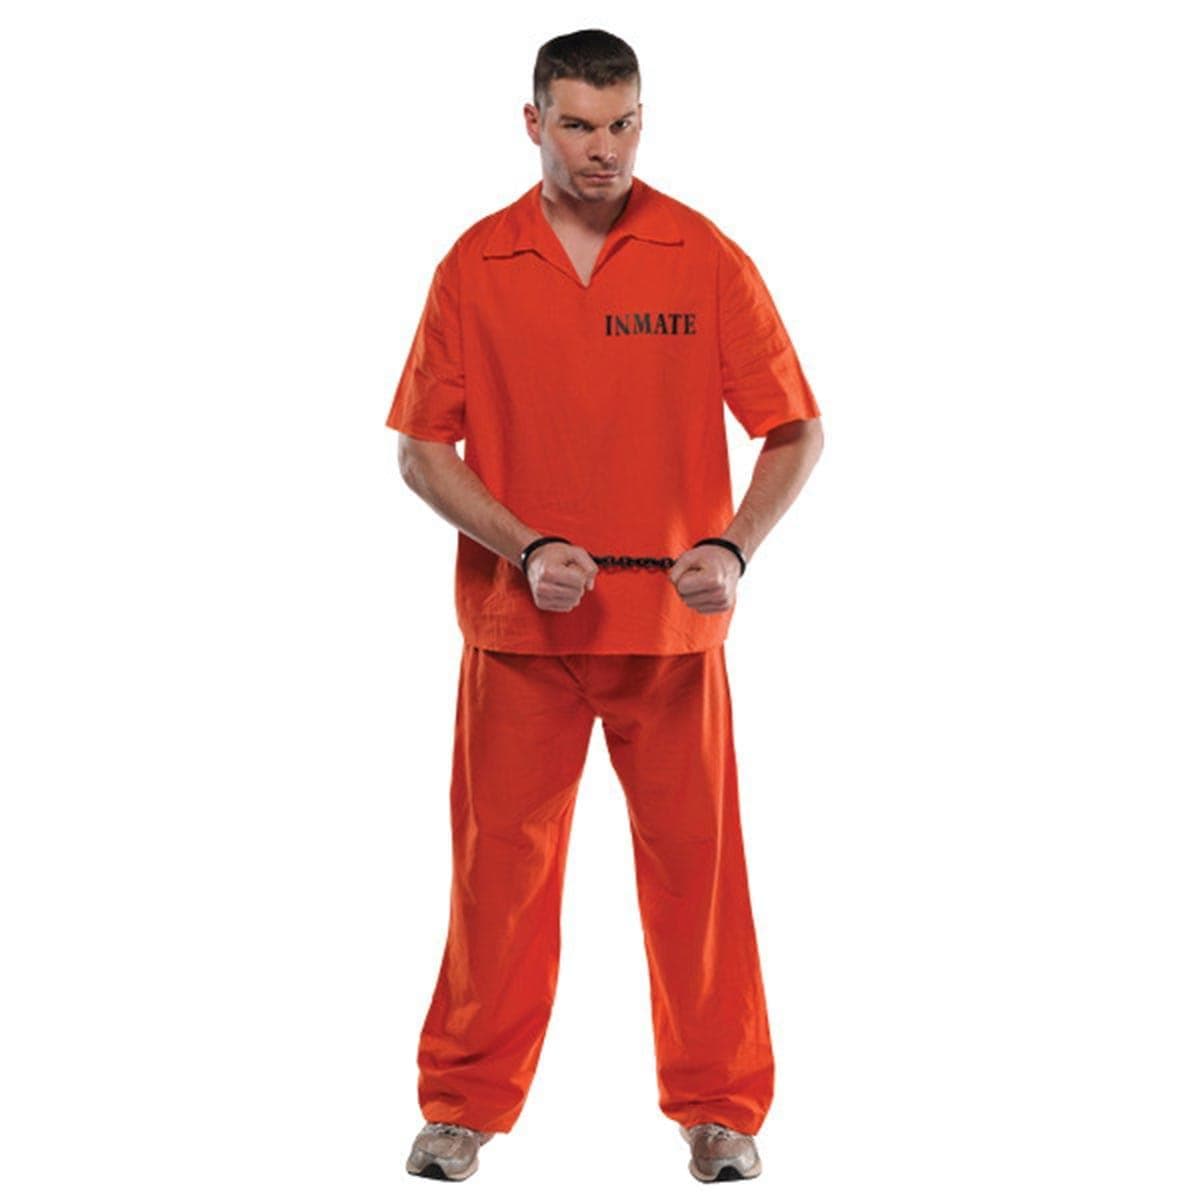 SUIT YOURSELF COSTUME CO. Costumes Orange Inmate Costume for Adults 809801702706